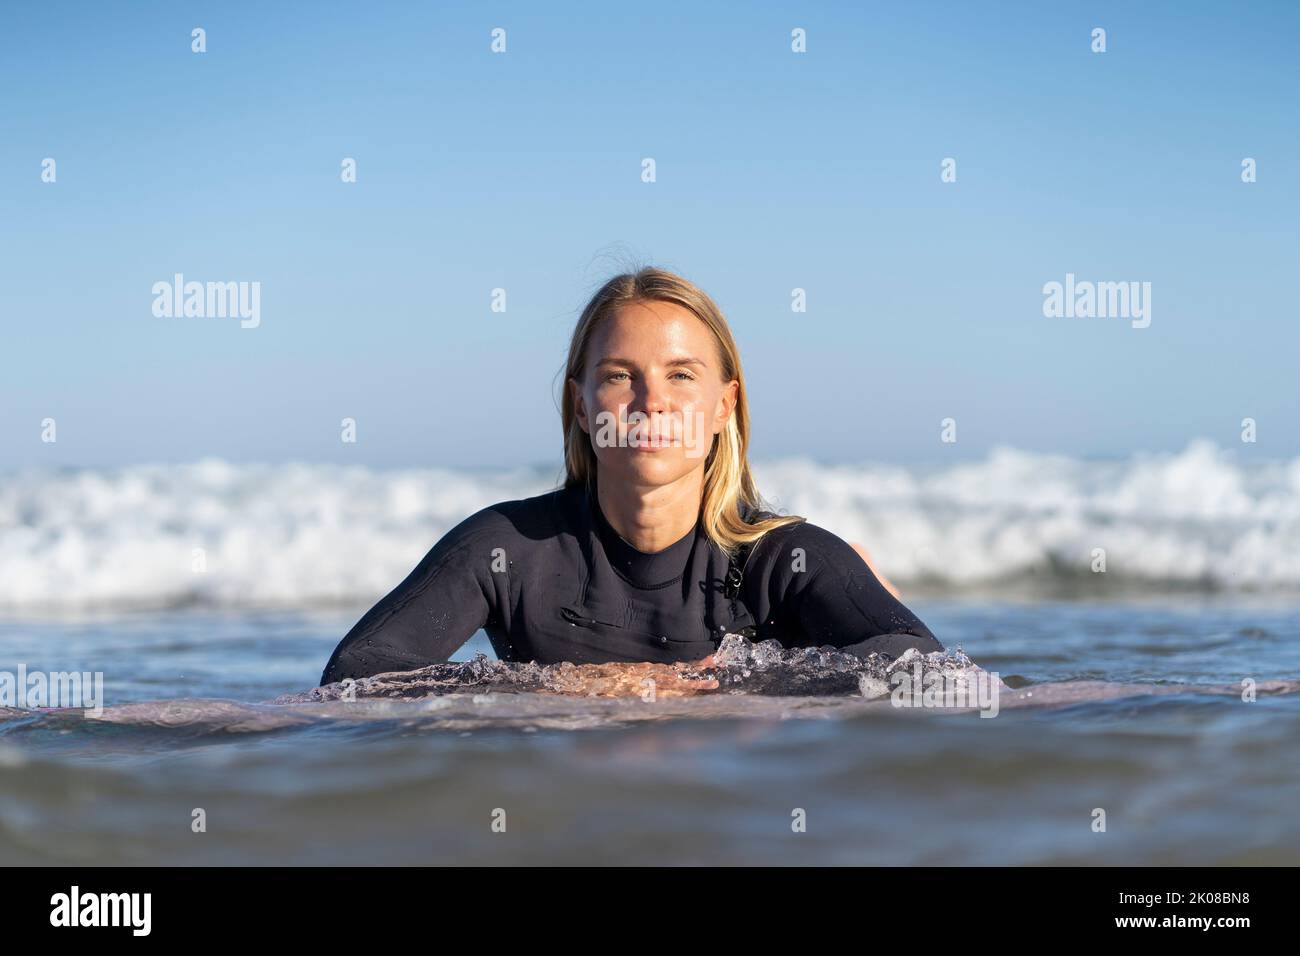 Beatiful surfer girl in the water. Female surfer woman Stock Photo